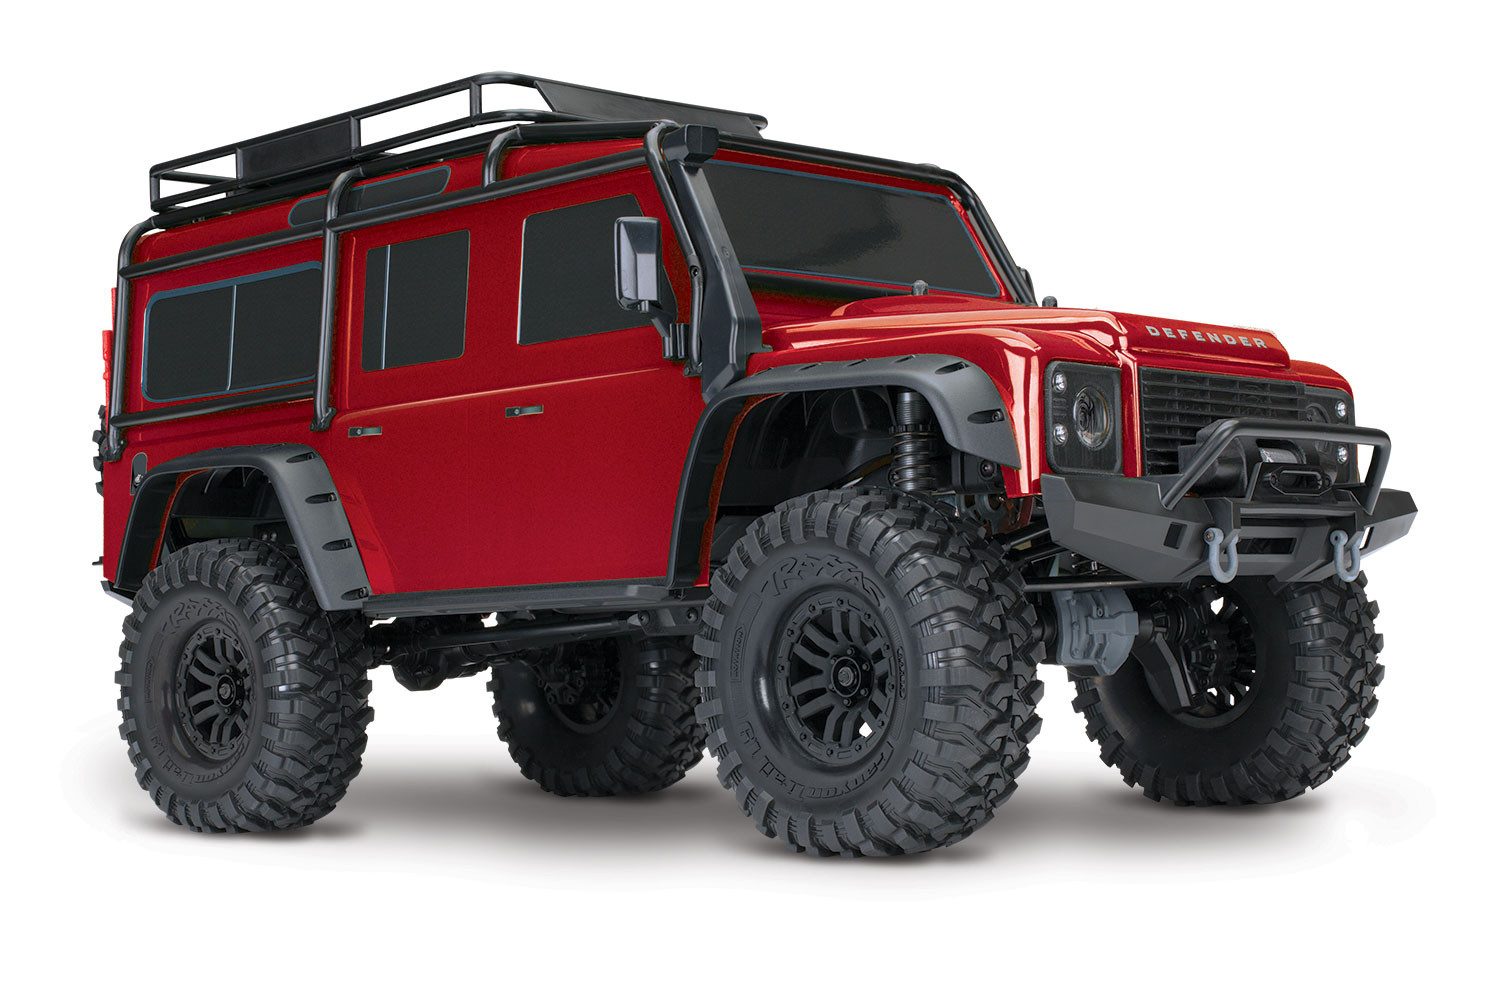 Traxxas RC-Monstertruck Traxxas TRX-4 Land Rover Rot Scale Trial Crawler 2,4Ghz RTR 1:10